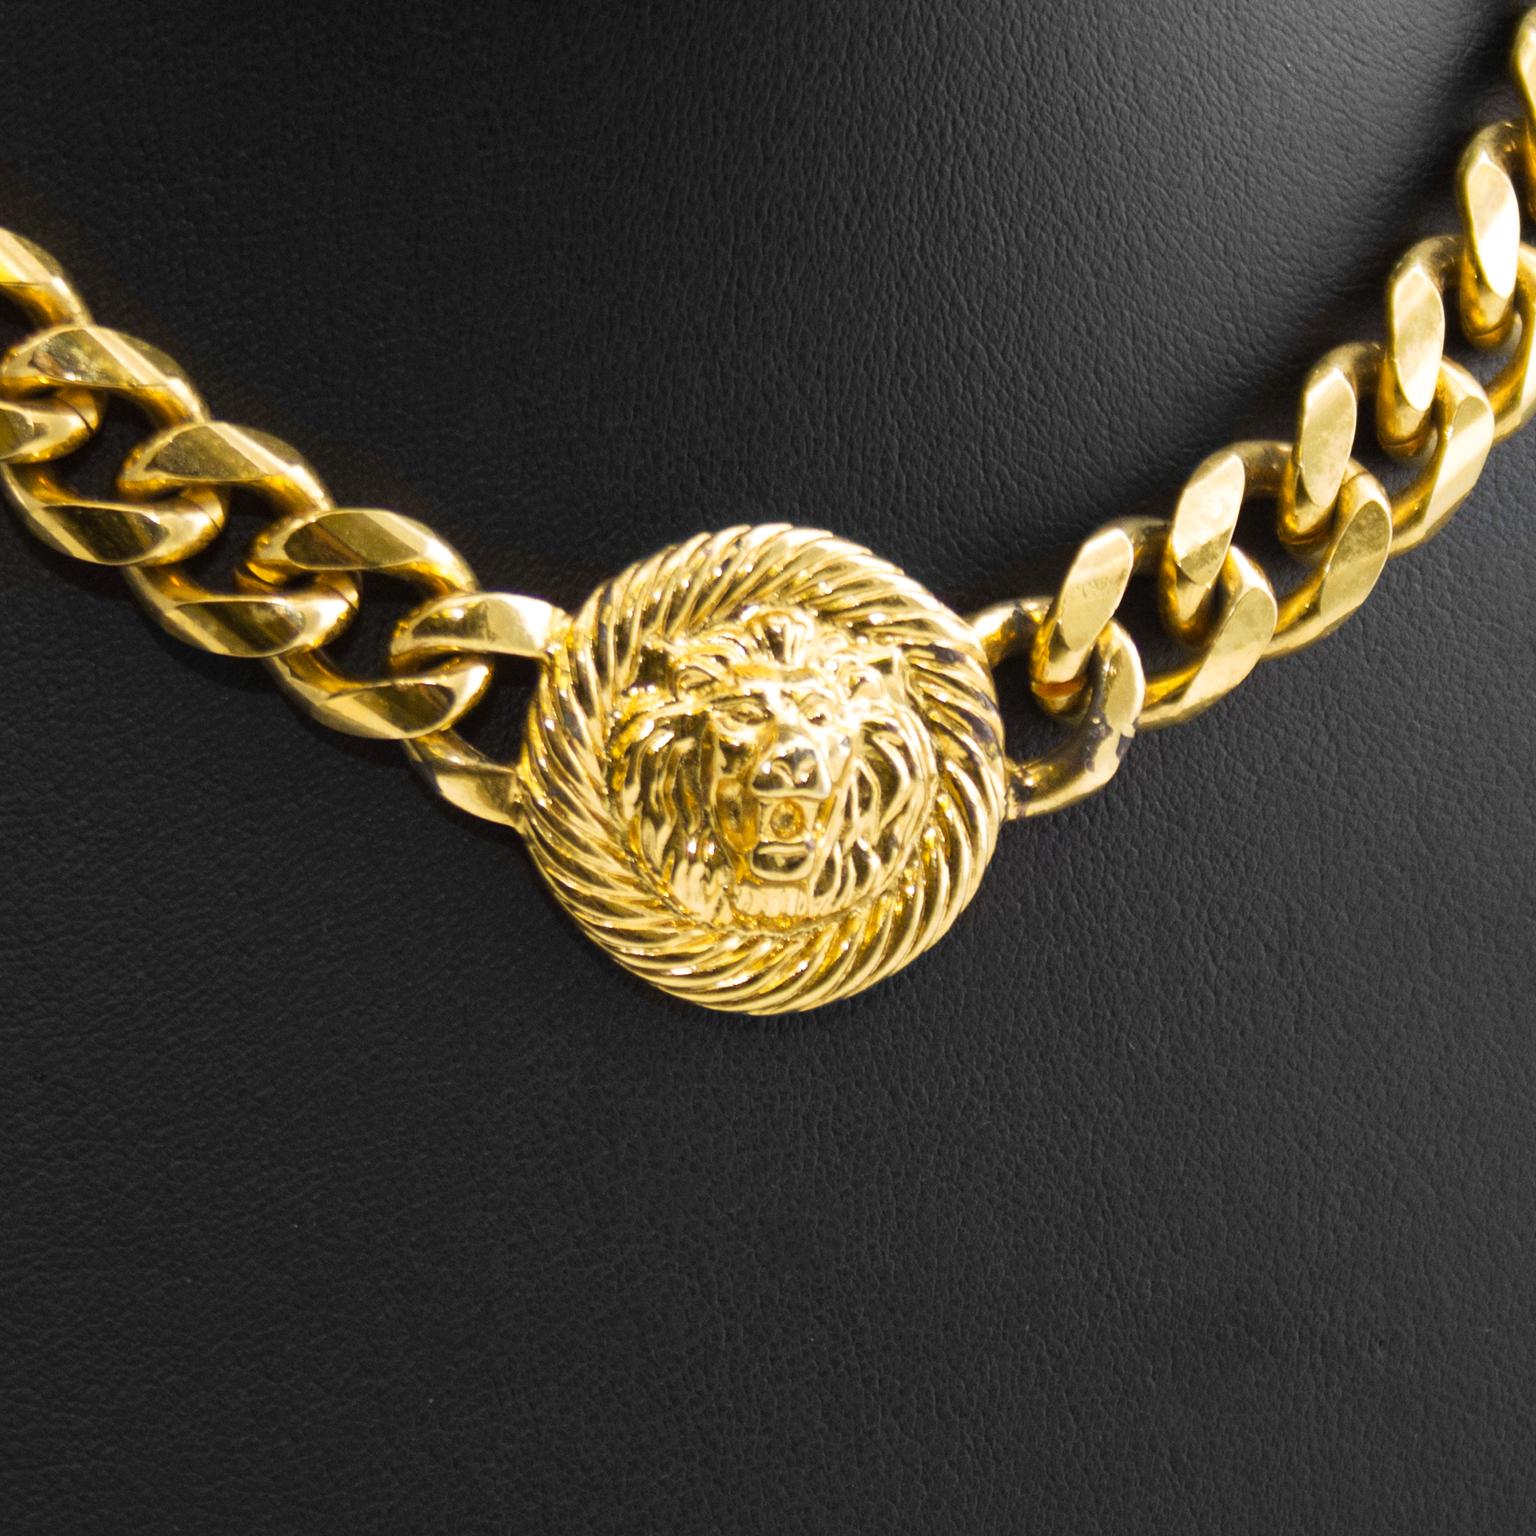 Anne Klein cuban link choker necklace from the 1980s. Center coin medallion has the iconic Anne Klein lion's head motif on it and the necklace closes with a toggle at the nape of the neck. In very good condition with some minor loss off gold plating